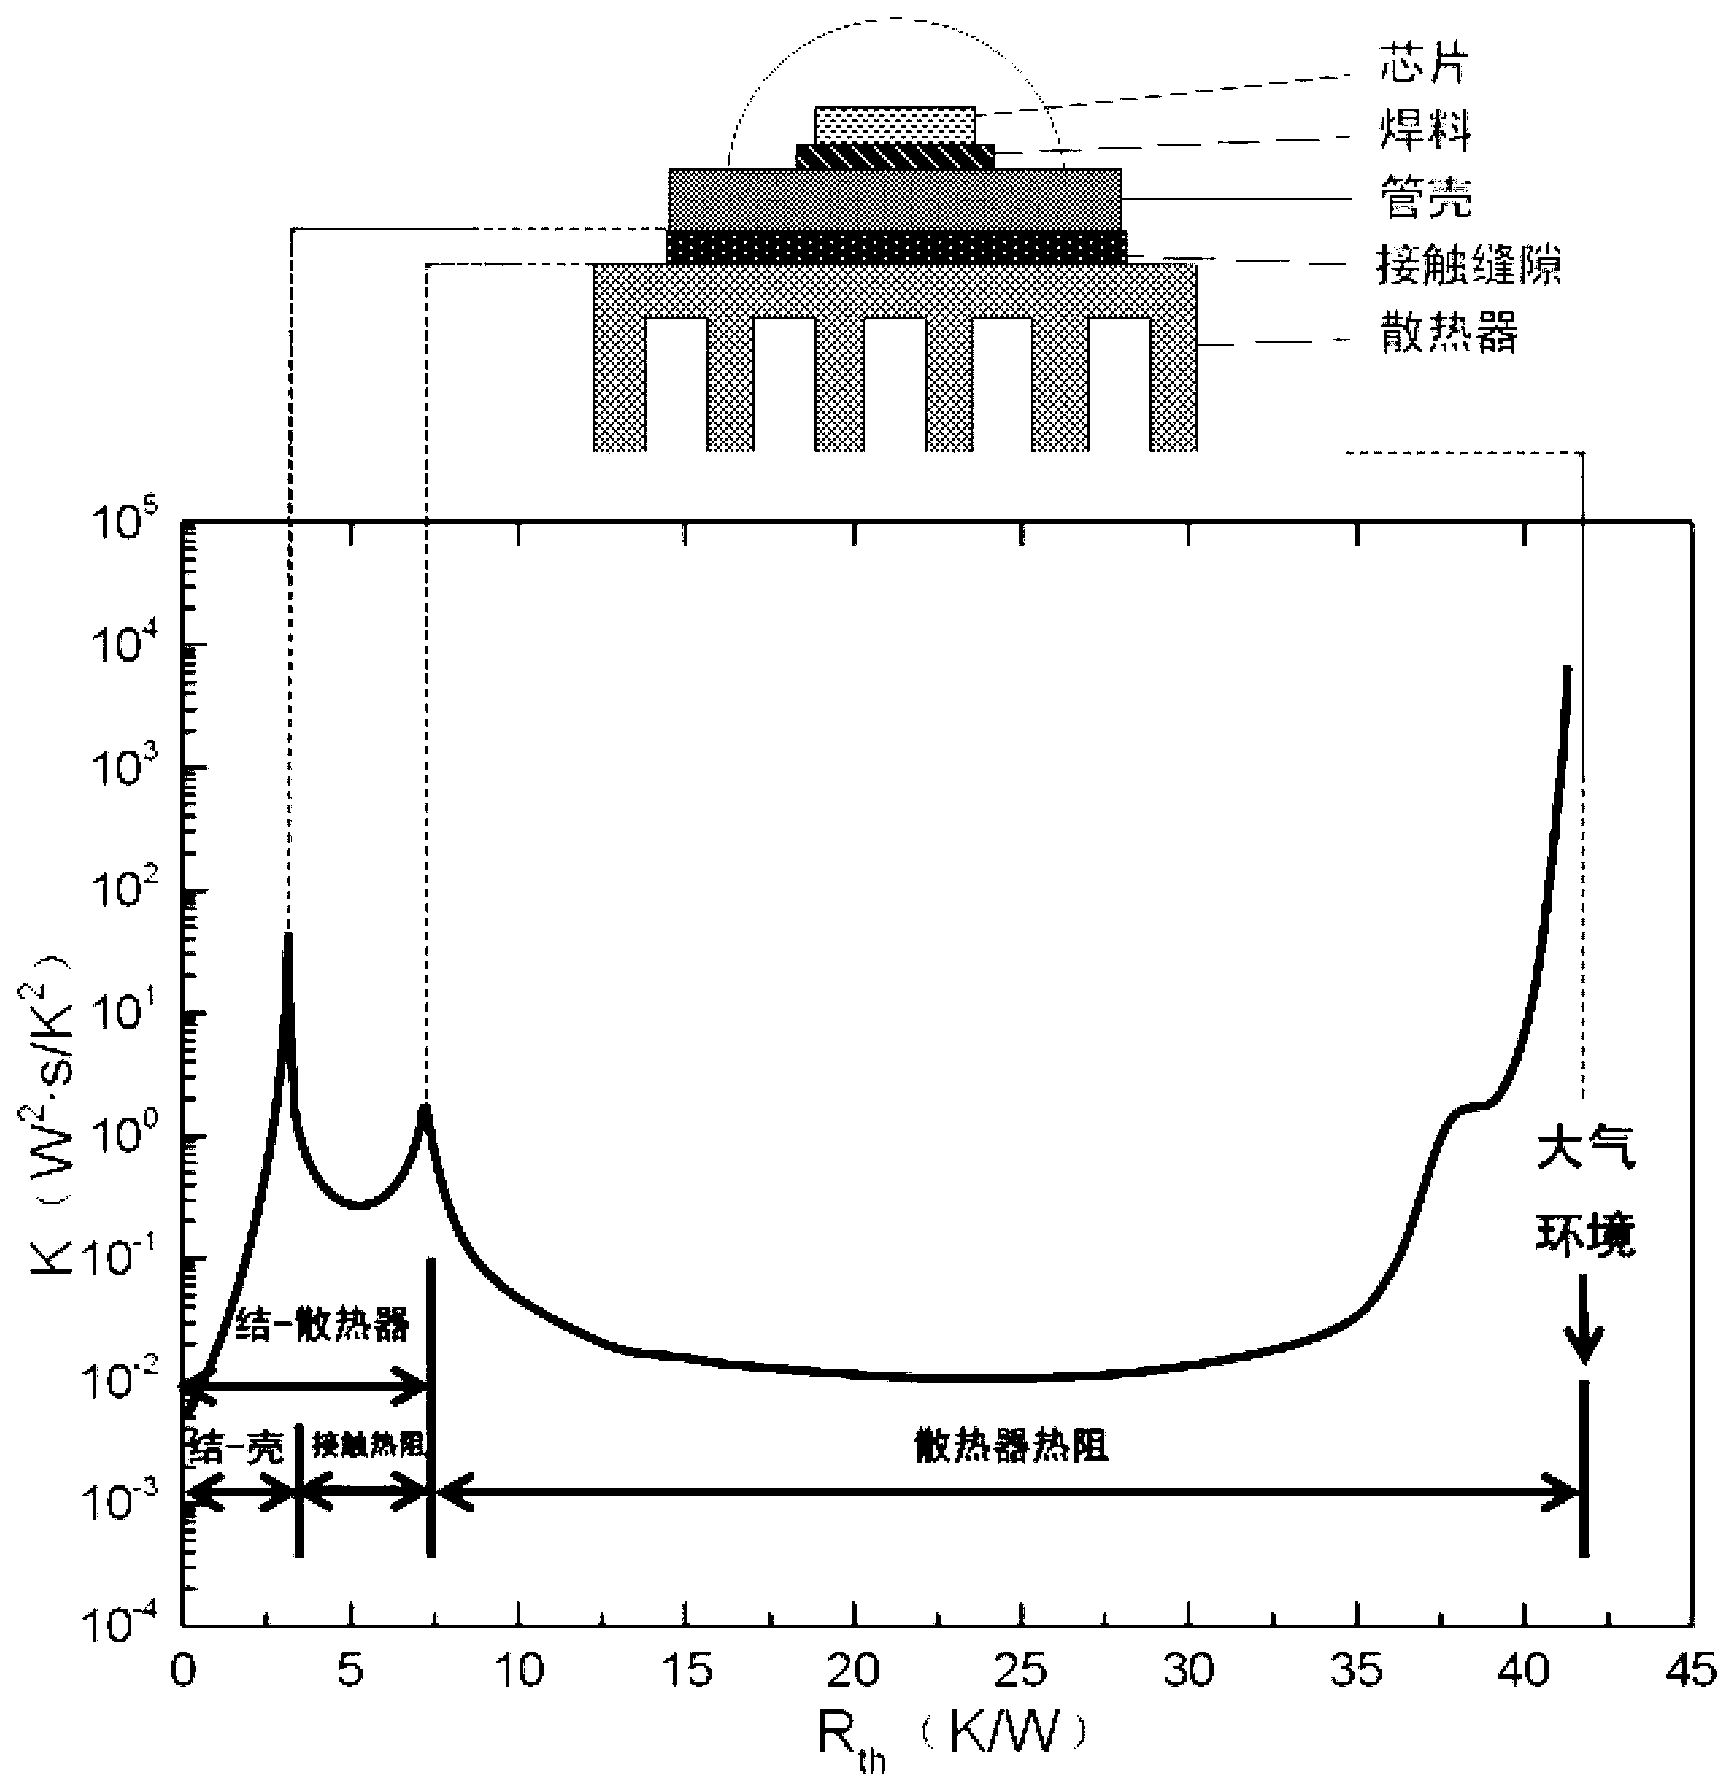 Thermal resistance composition test device and method for LED (light emitting diode) lamp